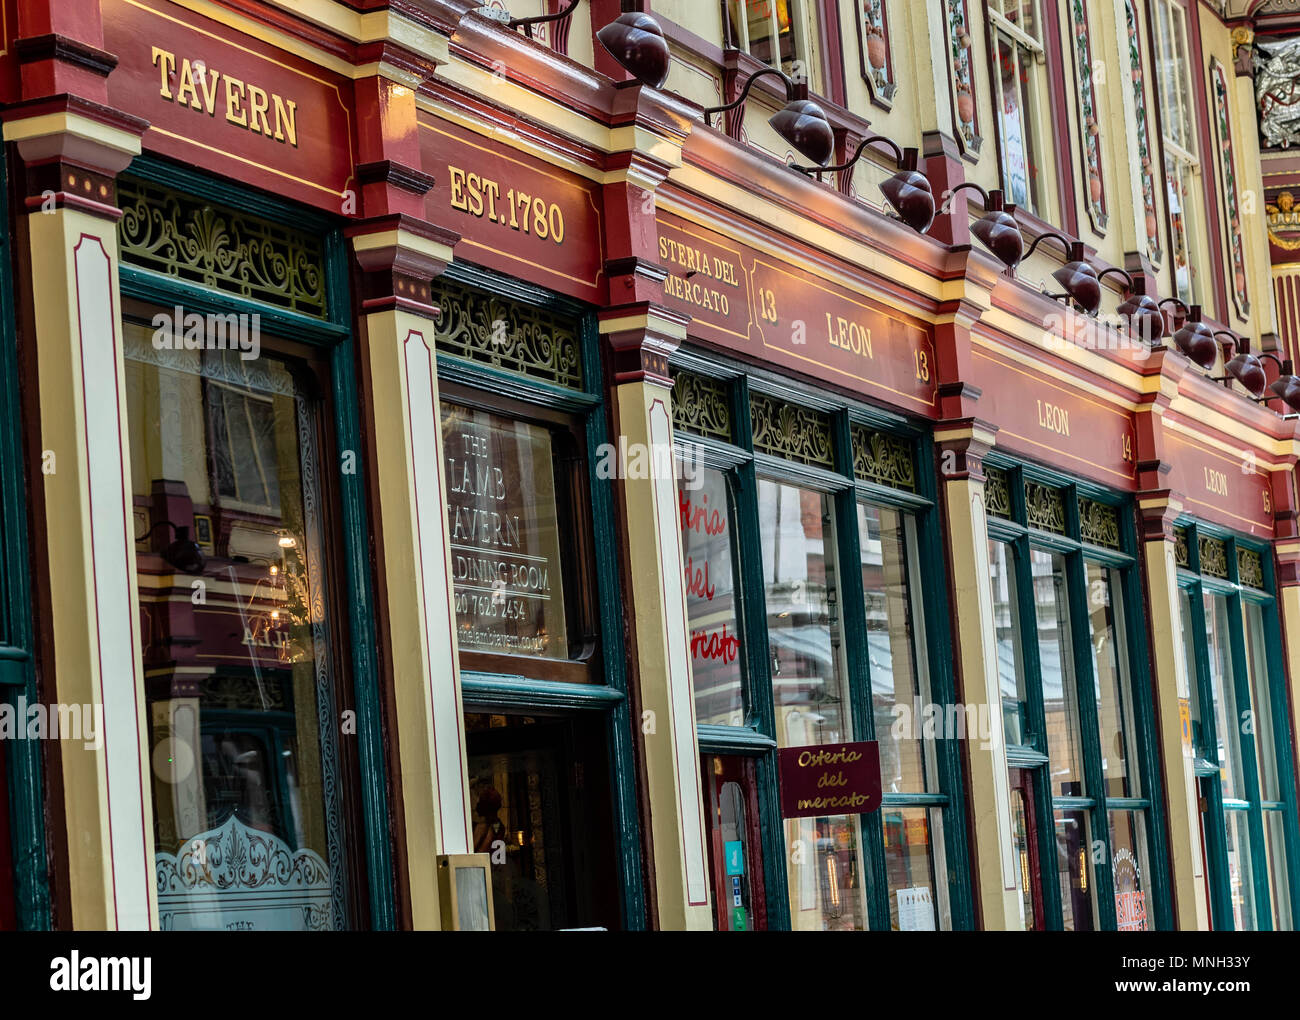 Leadenhall Market is a covered market in London, located on Gracechurch Street  It is one of the oldest markets in London, dating from the 14th century Stock Photo